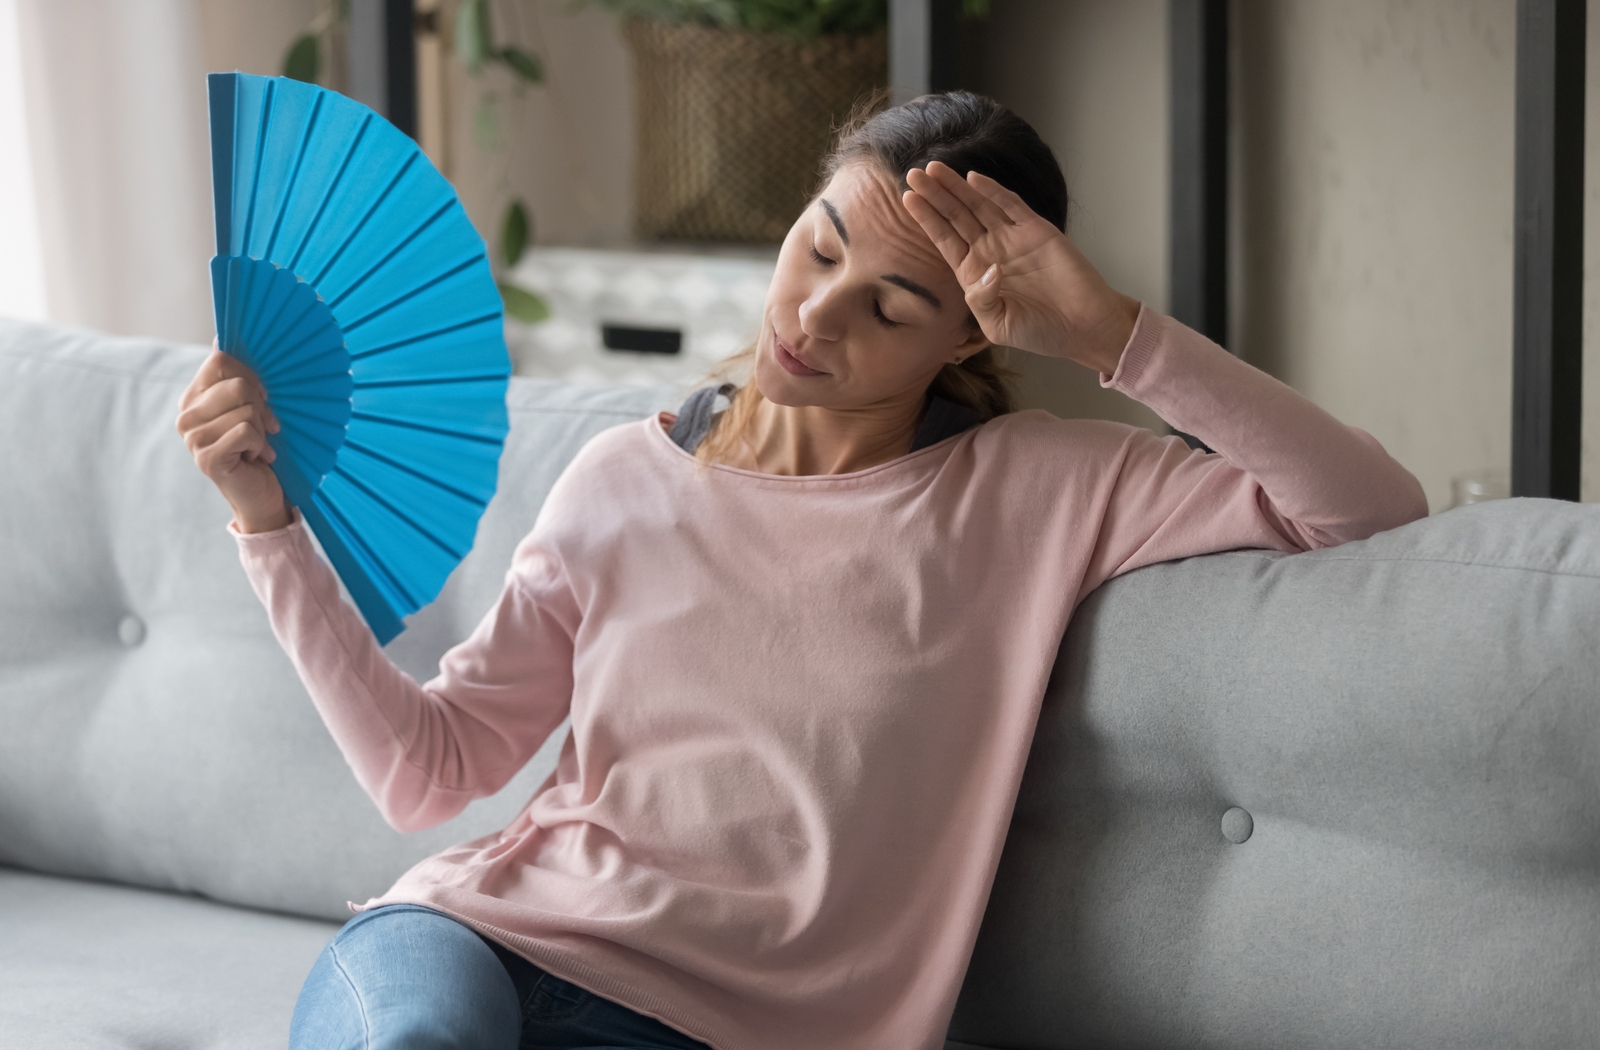 Woman sitting on her couch overheating using a paper fan to try to cool herself down because her air conditioning failed